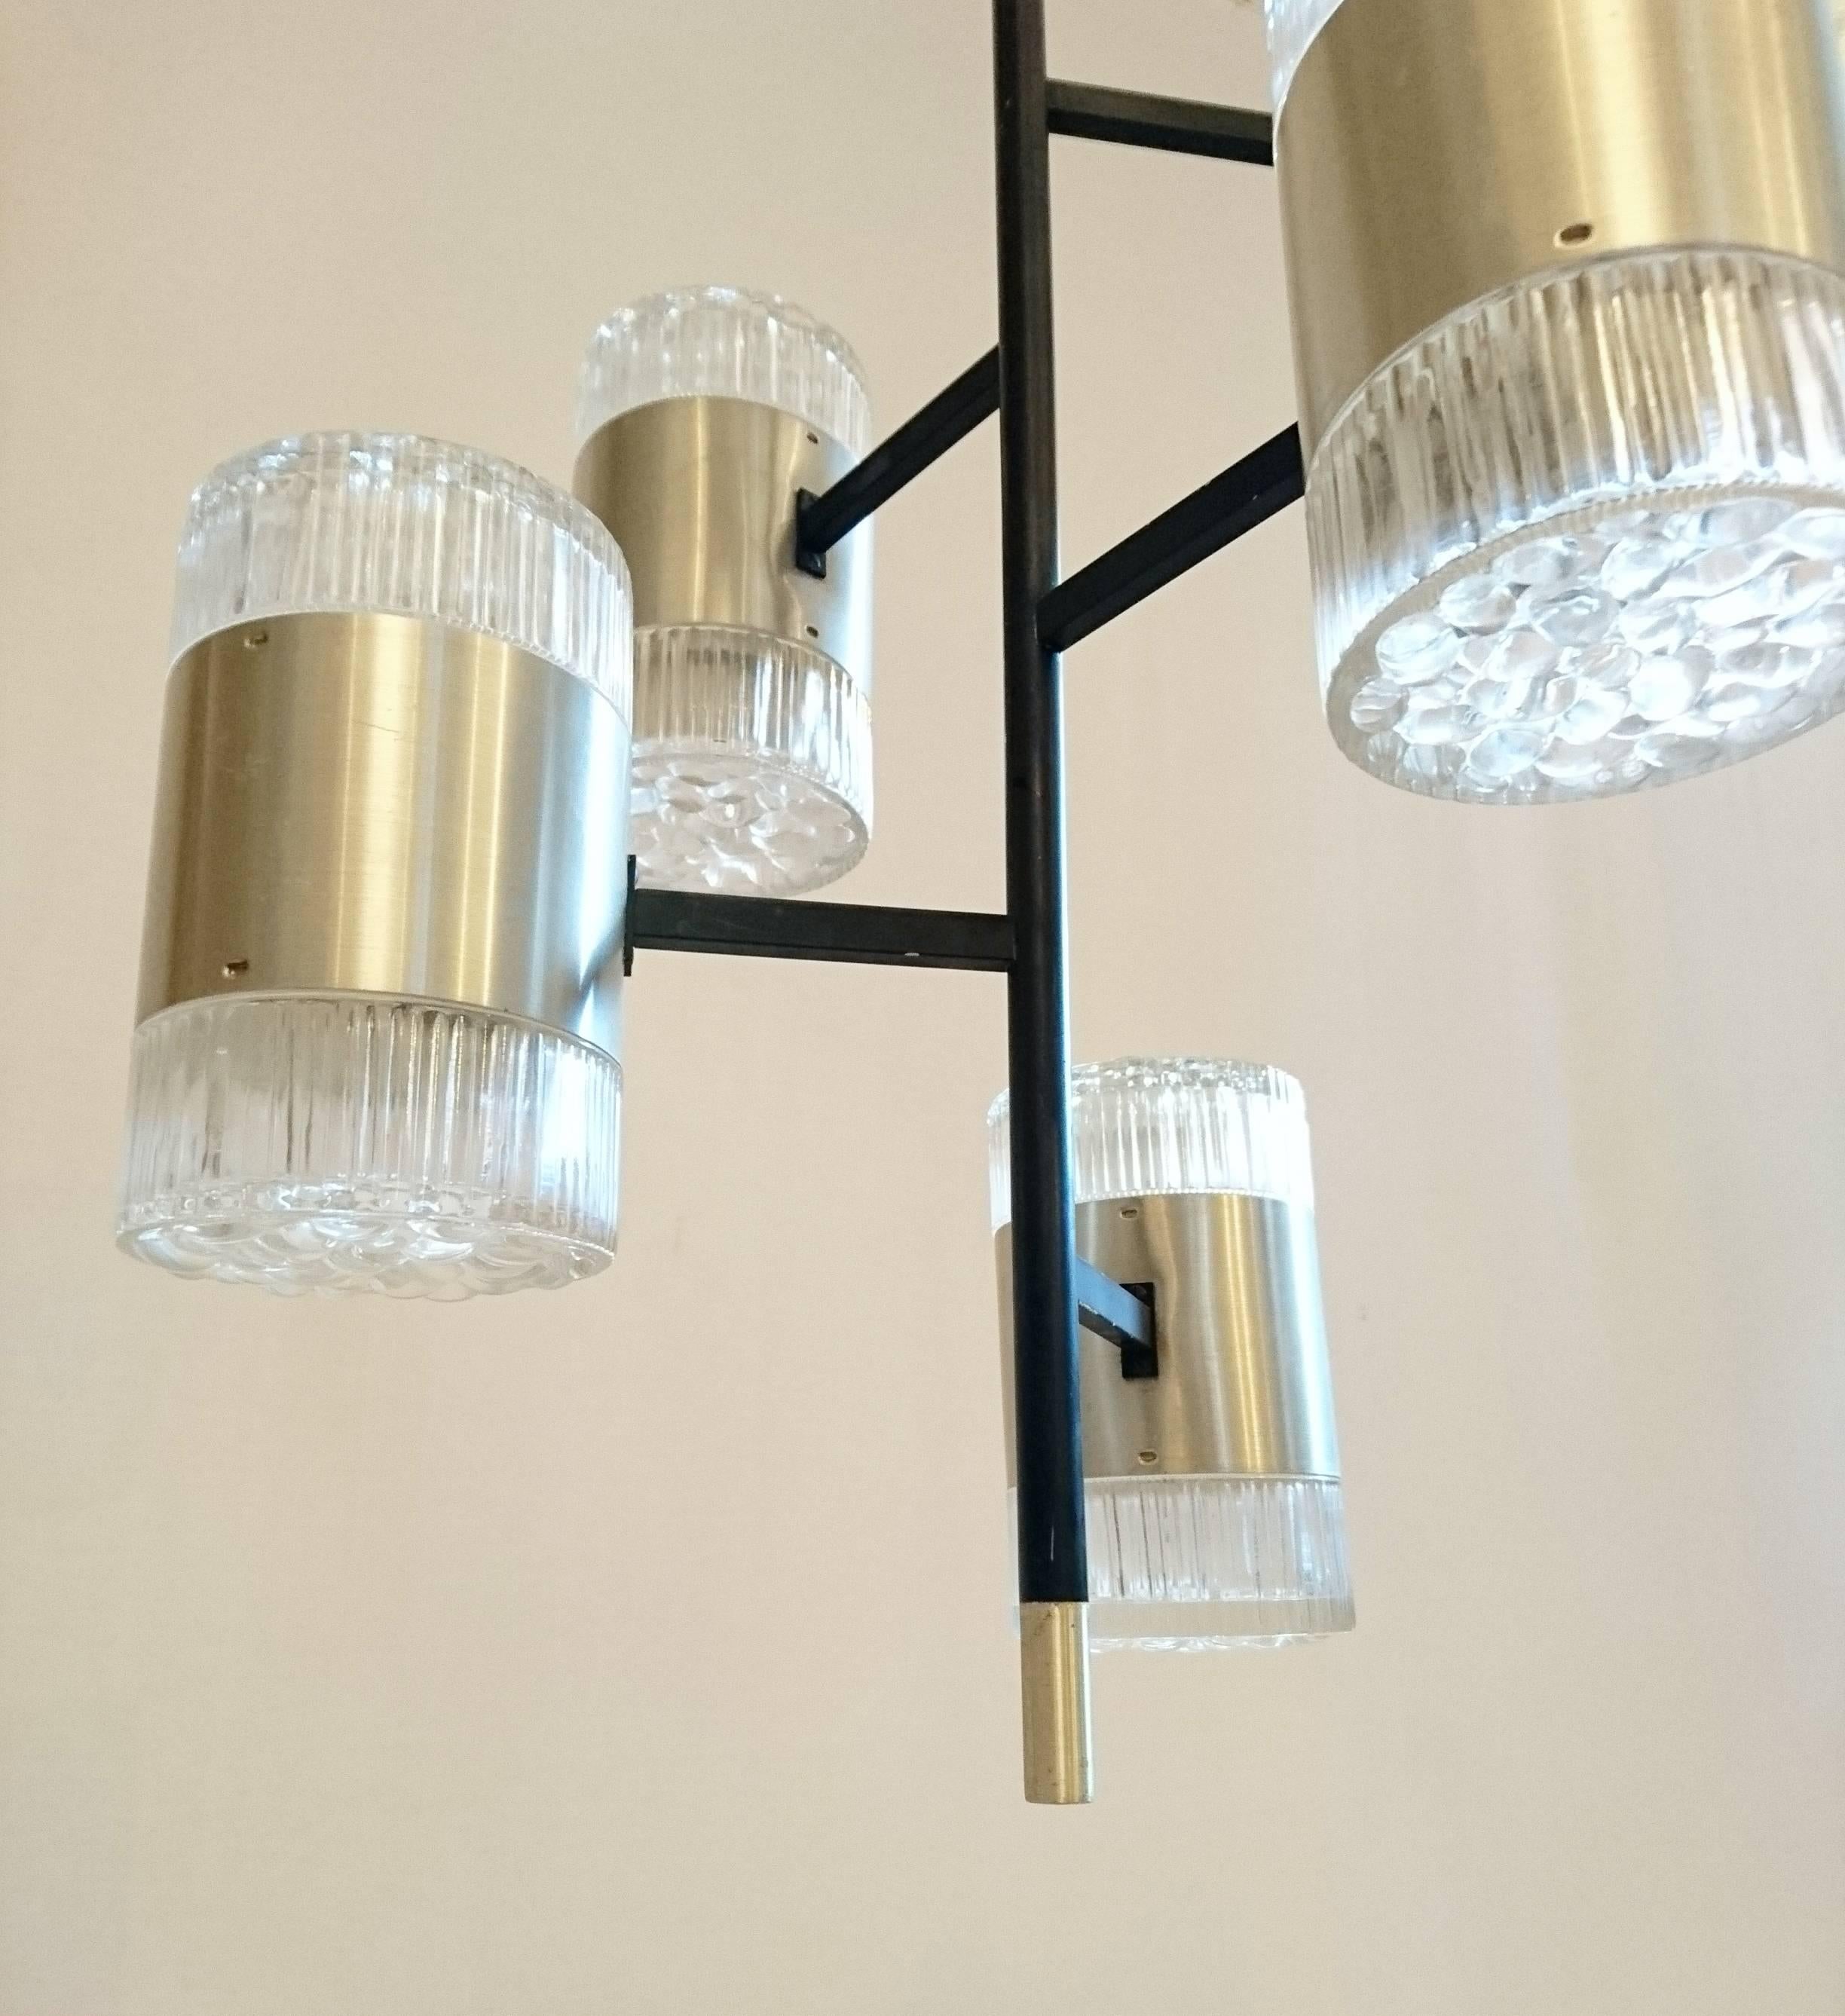 Modernist style ceiling lamp excellent for narrow spaces. Each lantern has two sockets so all in  all there is room for 12 lightbulbs.